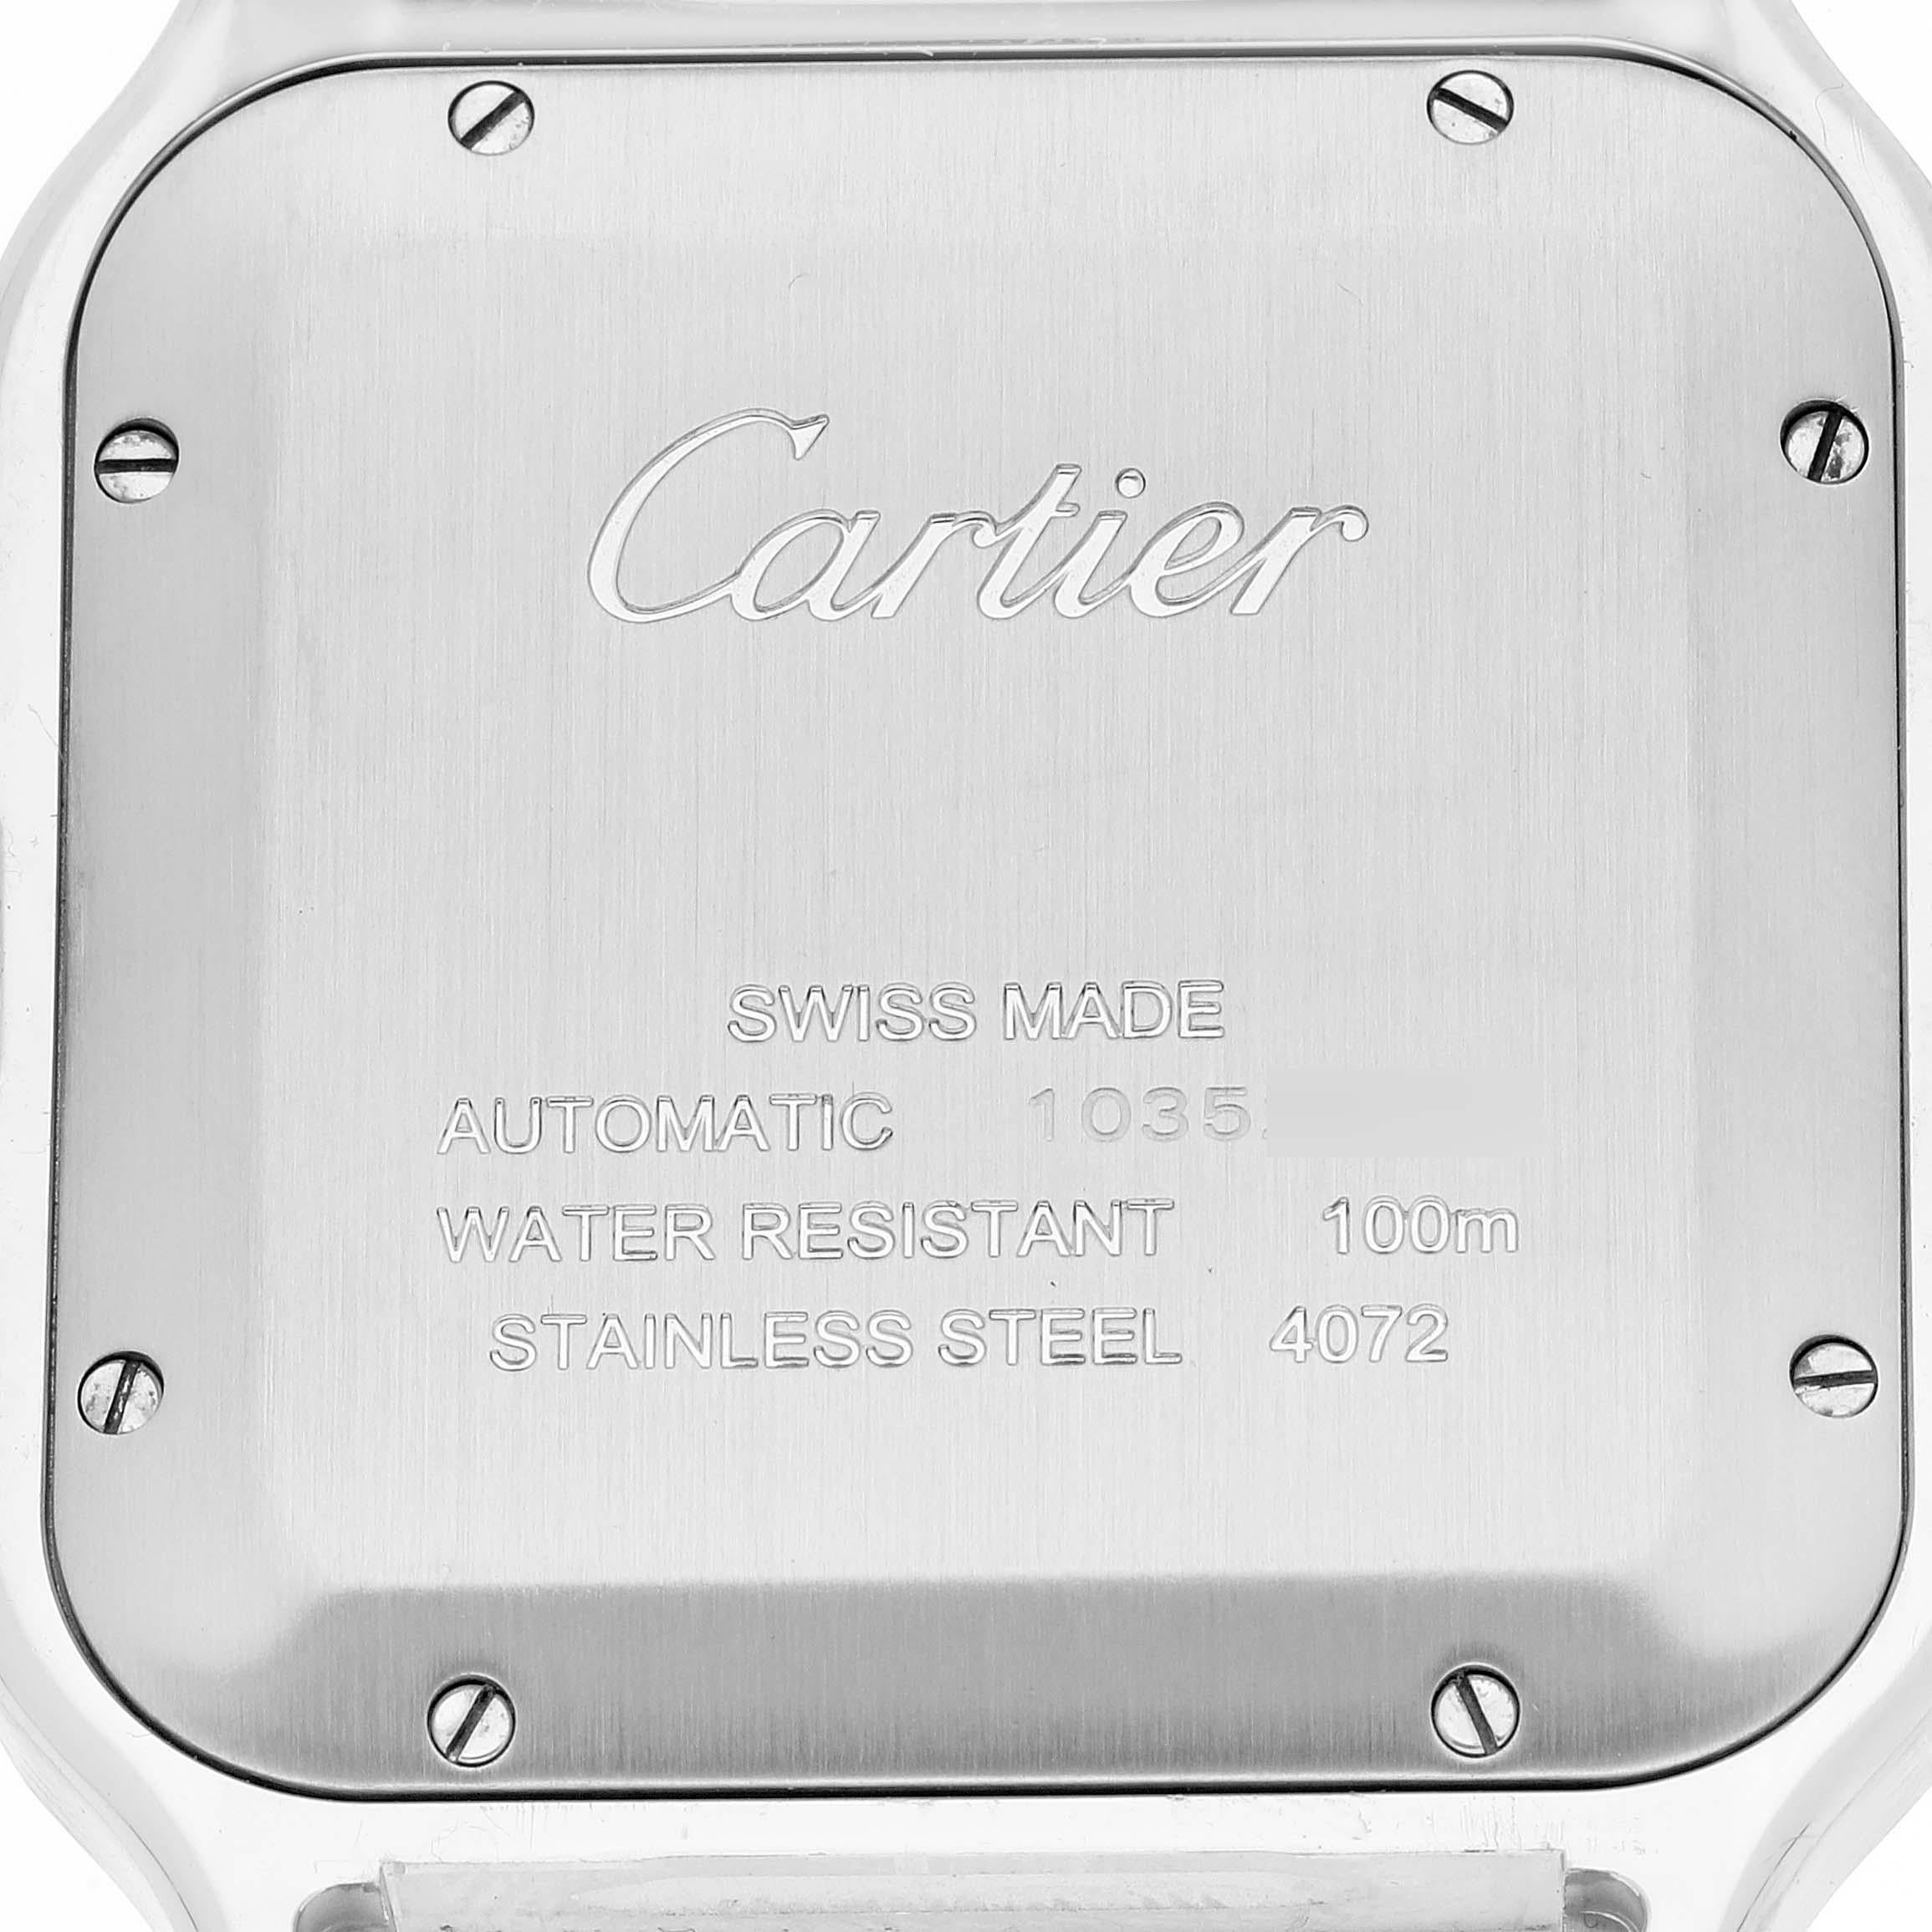 Cartier Santos Large Steel Yellow Gold Mens Watch W2SA0006 Box Card. Automatic self-winding movement. Stainless steel case 39.8 x 47.5mm. Steel octagonal crown set with blue faceted spinel. 18k yellow gold bezel punctuated with 8 signature screws.